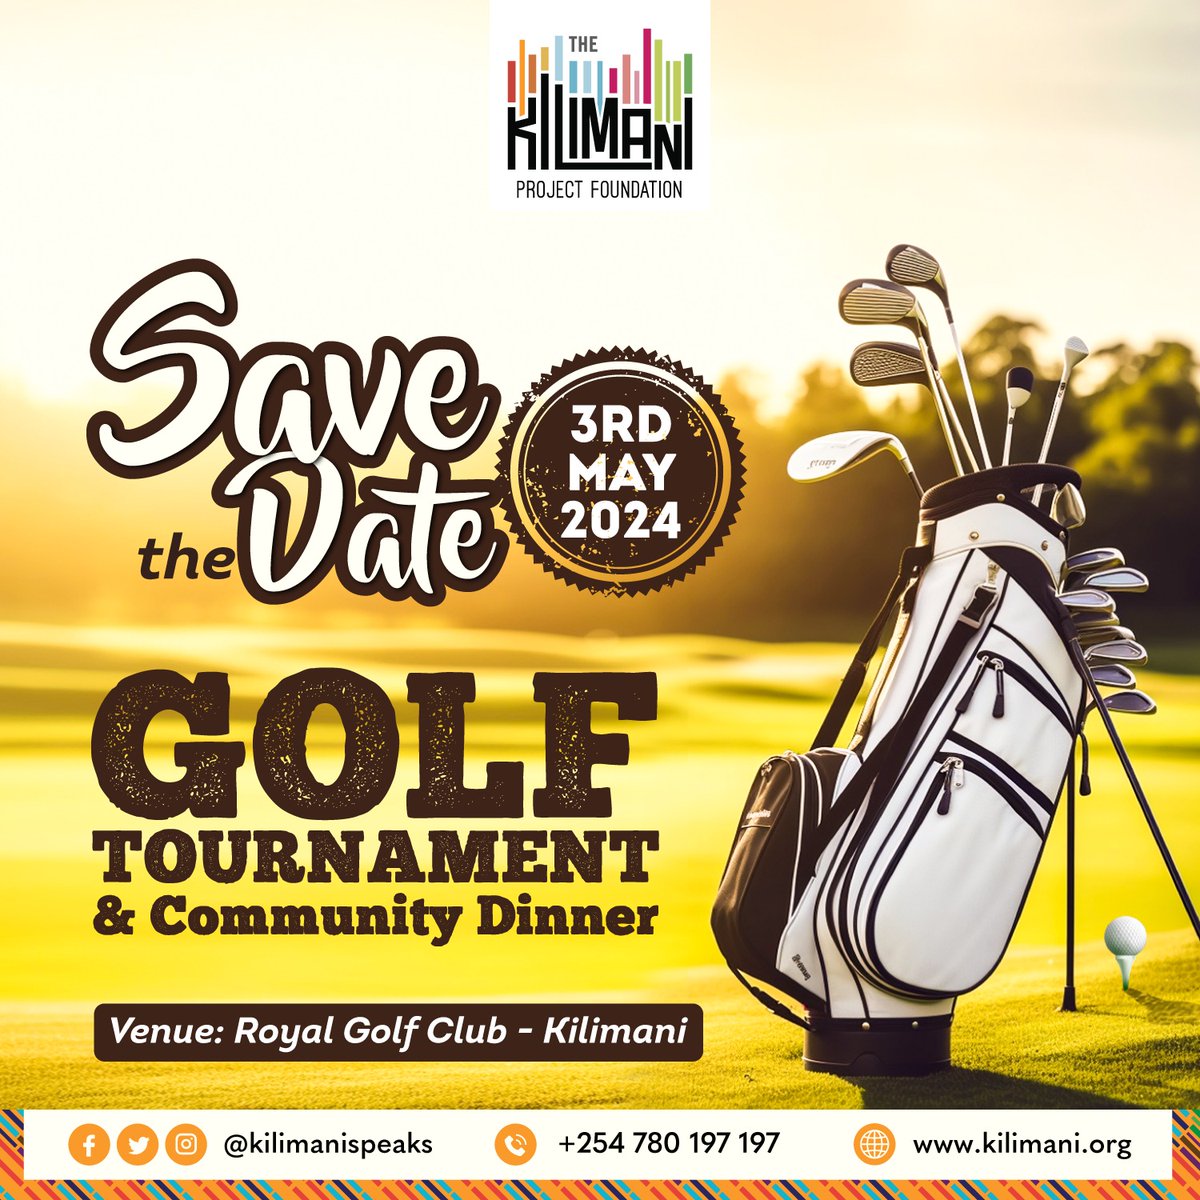 ⛳🏌🏾‍♀️SAVE THE DATE📢 Get ready to swing into action for a great cause! We are thrilled to announce our upcoming Charity Golf Tournament and Community Dinner on the 3rd of May Stay tuned for more details, but for now mark your calendars and save the date! We can't wait to tee